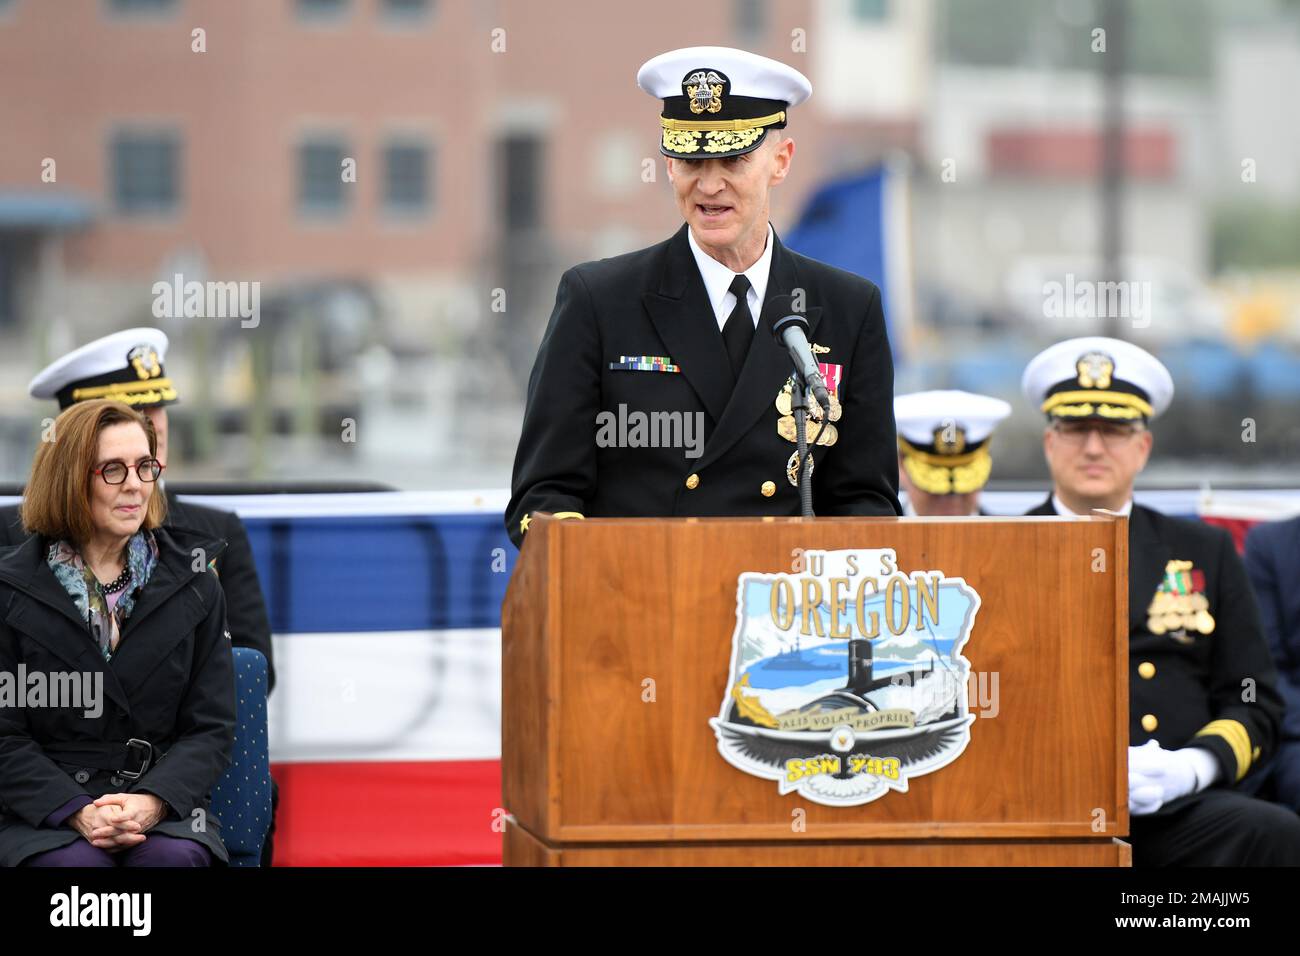 220528-N-GR655-0076 GROTON, Connecticut (May 28, 2022) – Adm. Frank Caldwell, director of the Naval Nuclear Propulsion Program, delivers remarks during a commissioning ceremony for the Virginia-class fast attack submarine USS Oregon (SSN 793) in Groton, Conn., May 28, 2022. SSN 793, the third U.S Navy ship launched with the name Oregon and first in more than a century, is a flexible, multi-mission platform designed to carry out the seven core competencies of the submarine force: anti-submarine warfare; anti-surface warfare; delivery of special operations forces; strike warfare; irregular warfa Stock Photo